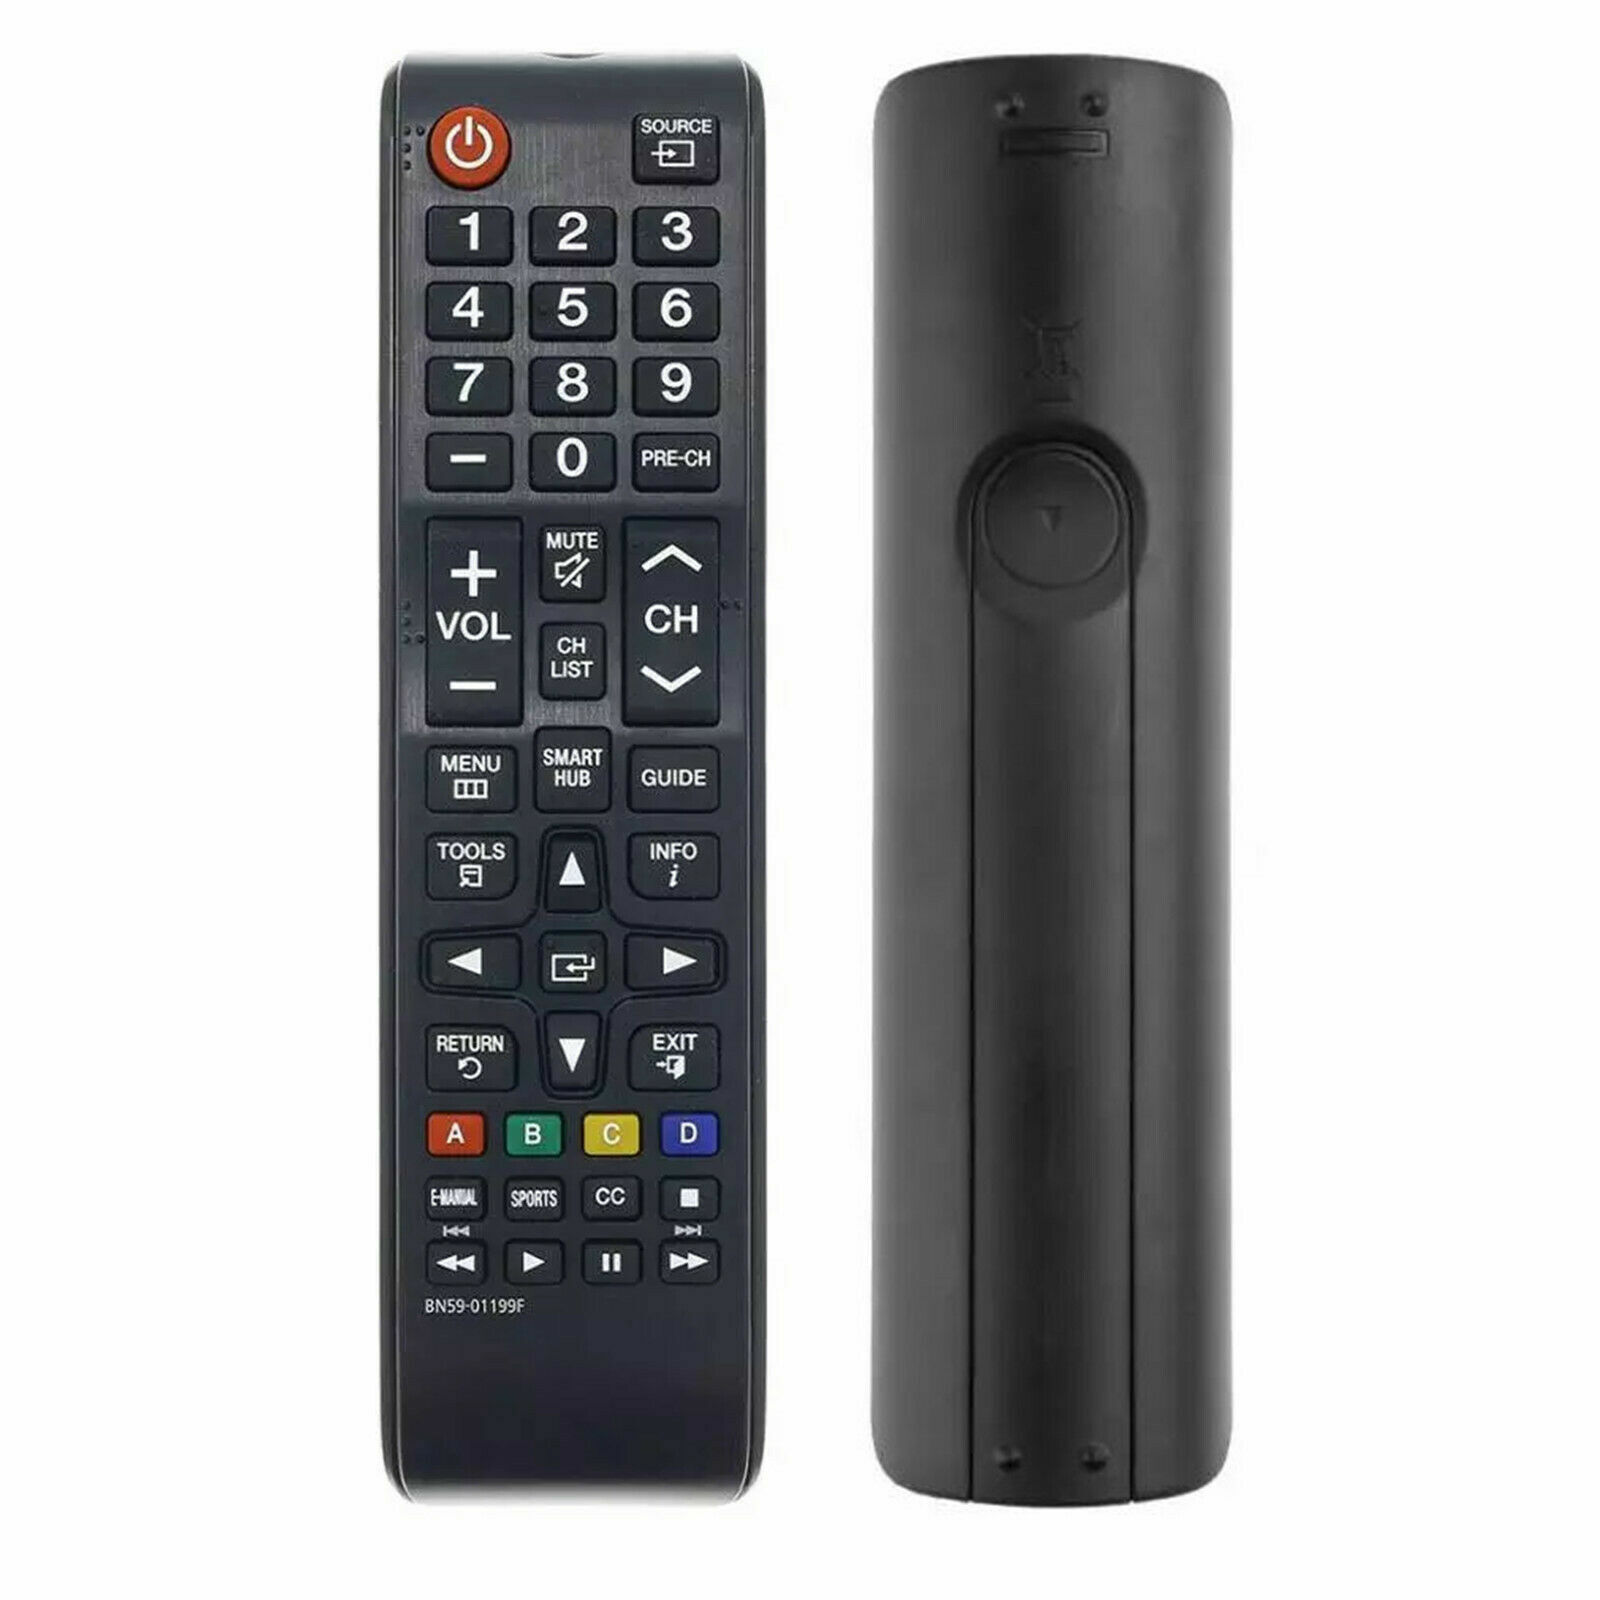 New Universal Remote Control for ALL Samsung LCD LED HDTV 3D Smart TVs For-SAMSUNG BN59-01199F - фотография #4